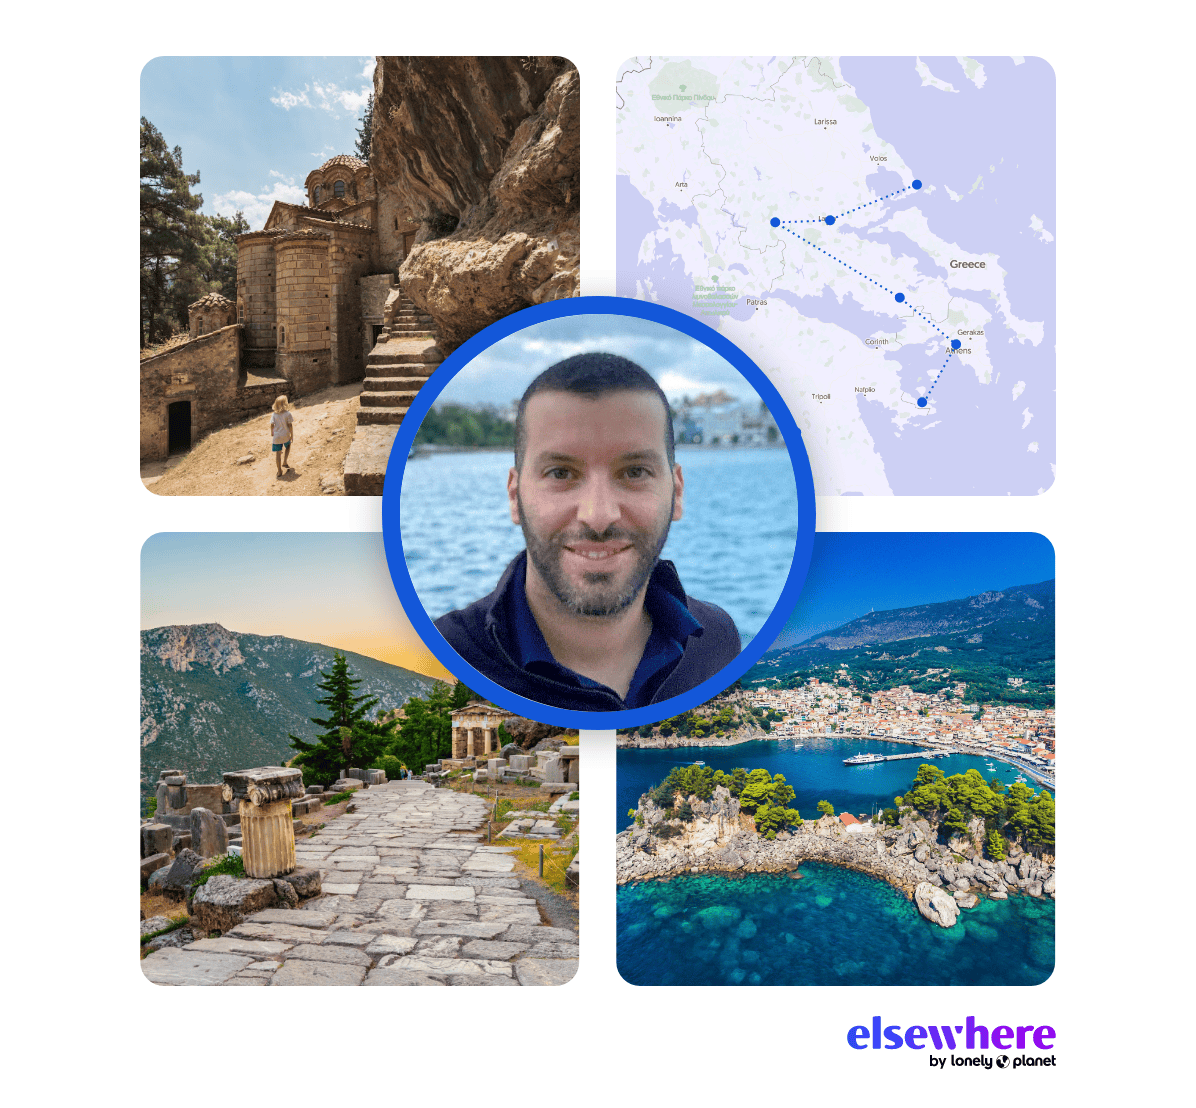 Meet with Albert, our Local Expert in Greece